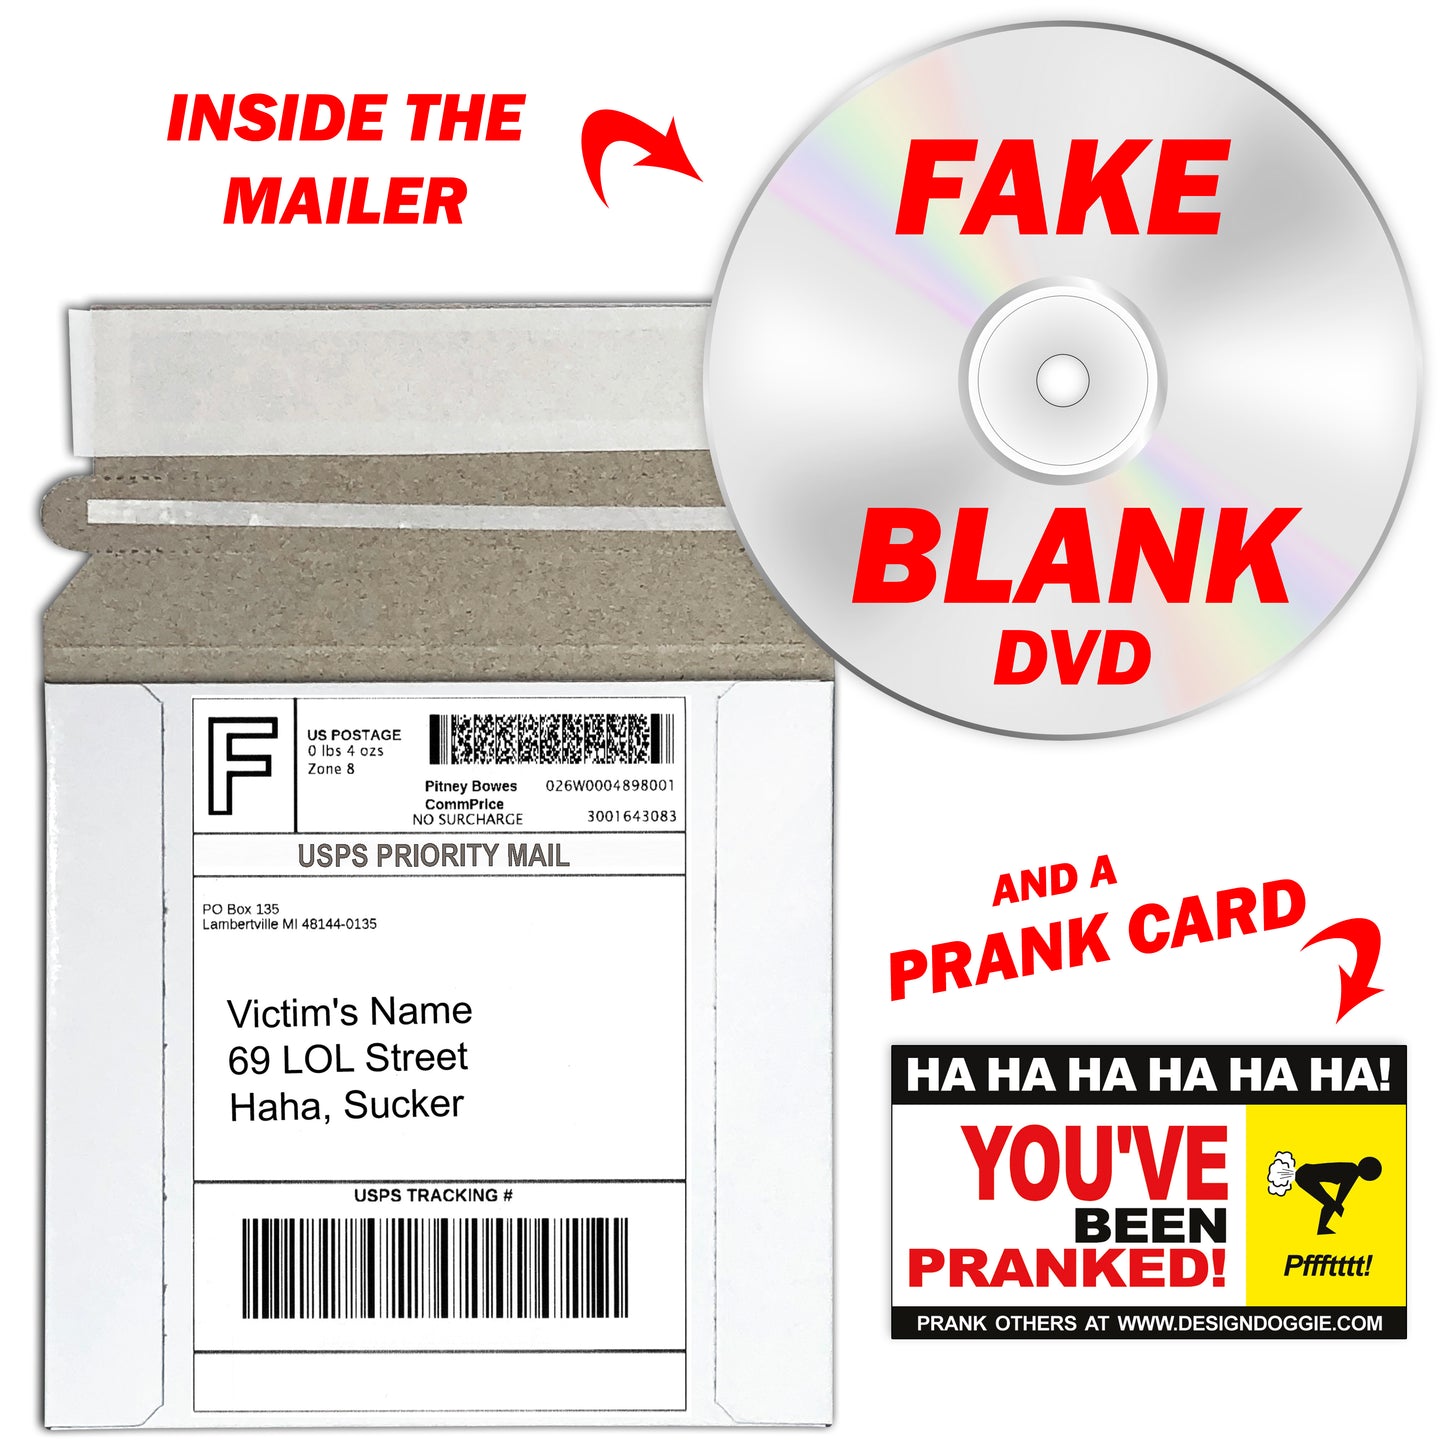 Cat's Hacking Fake DVD mail prank gets sent directly to your victims 100% anonymously!